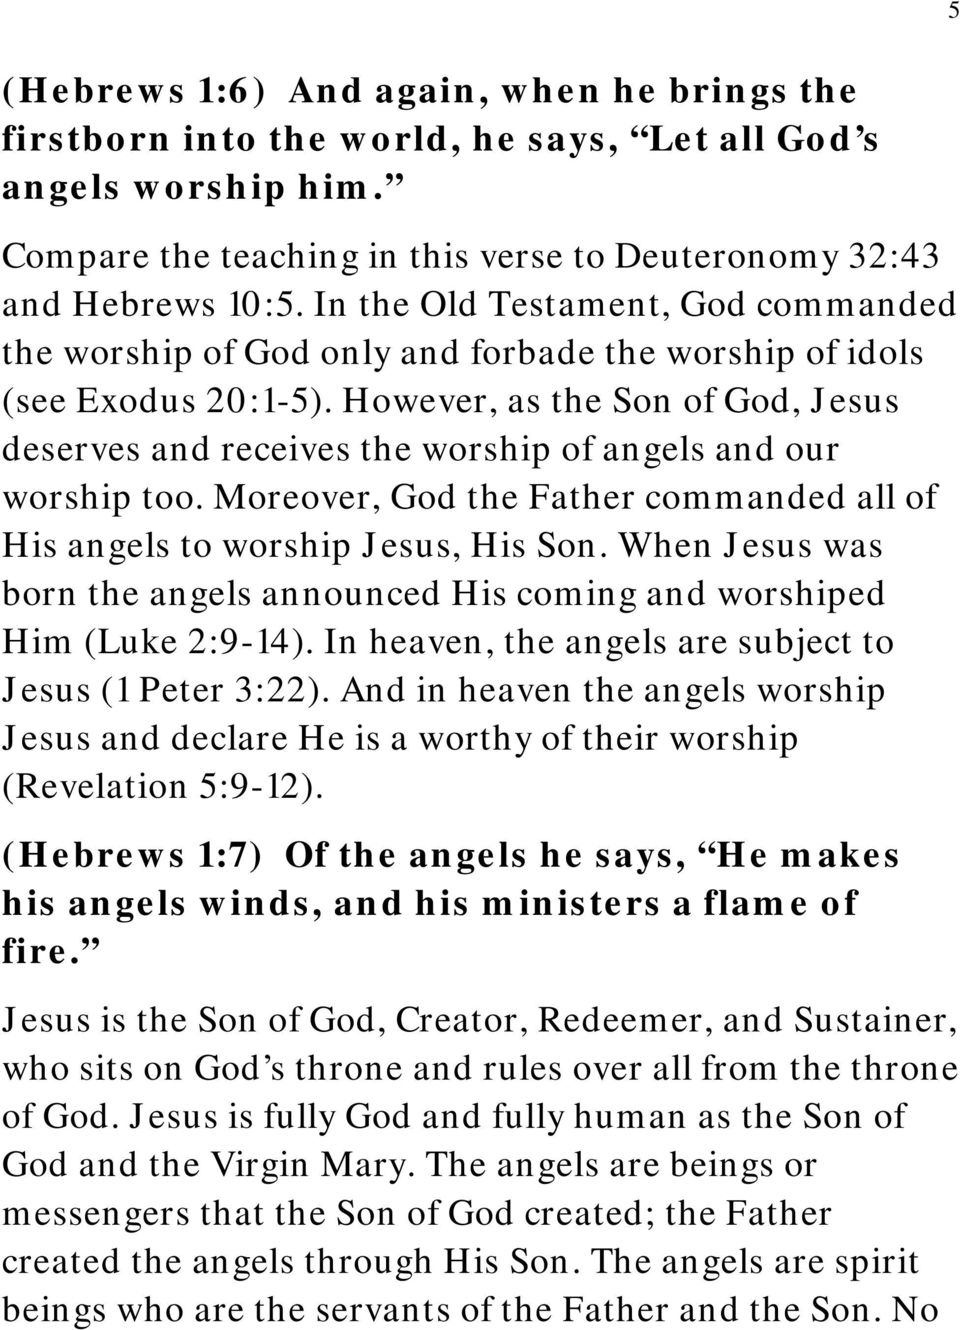 However, as the Son of God, Jesus deserves and receives the worship of angels and our worship too. Moreover, God the Father commanded all of His angels to worship Jesus, His Son.